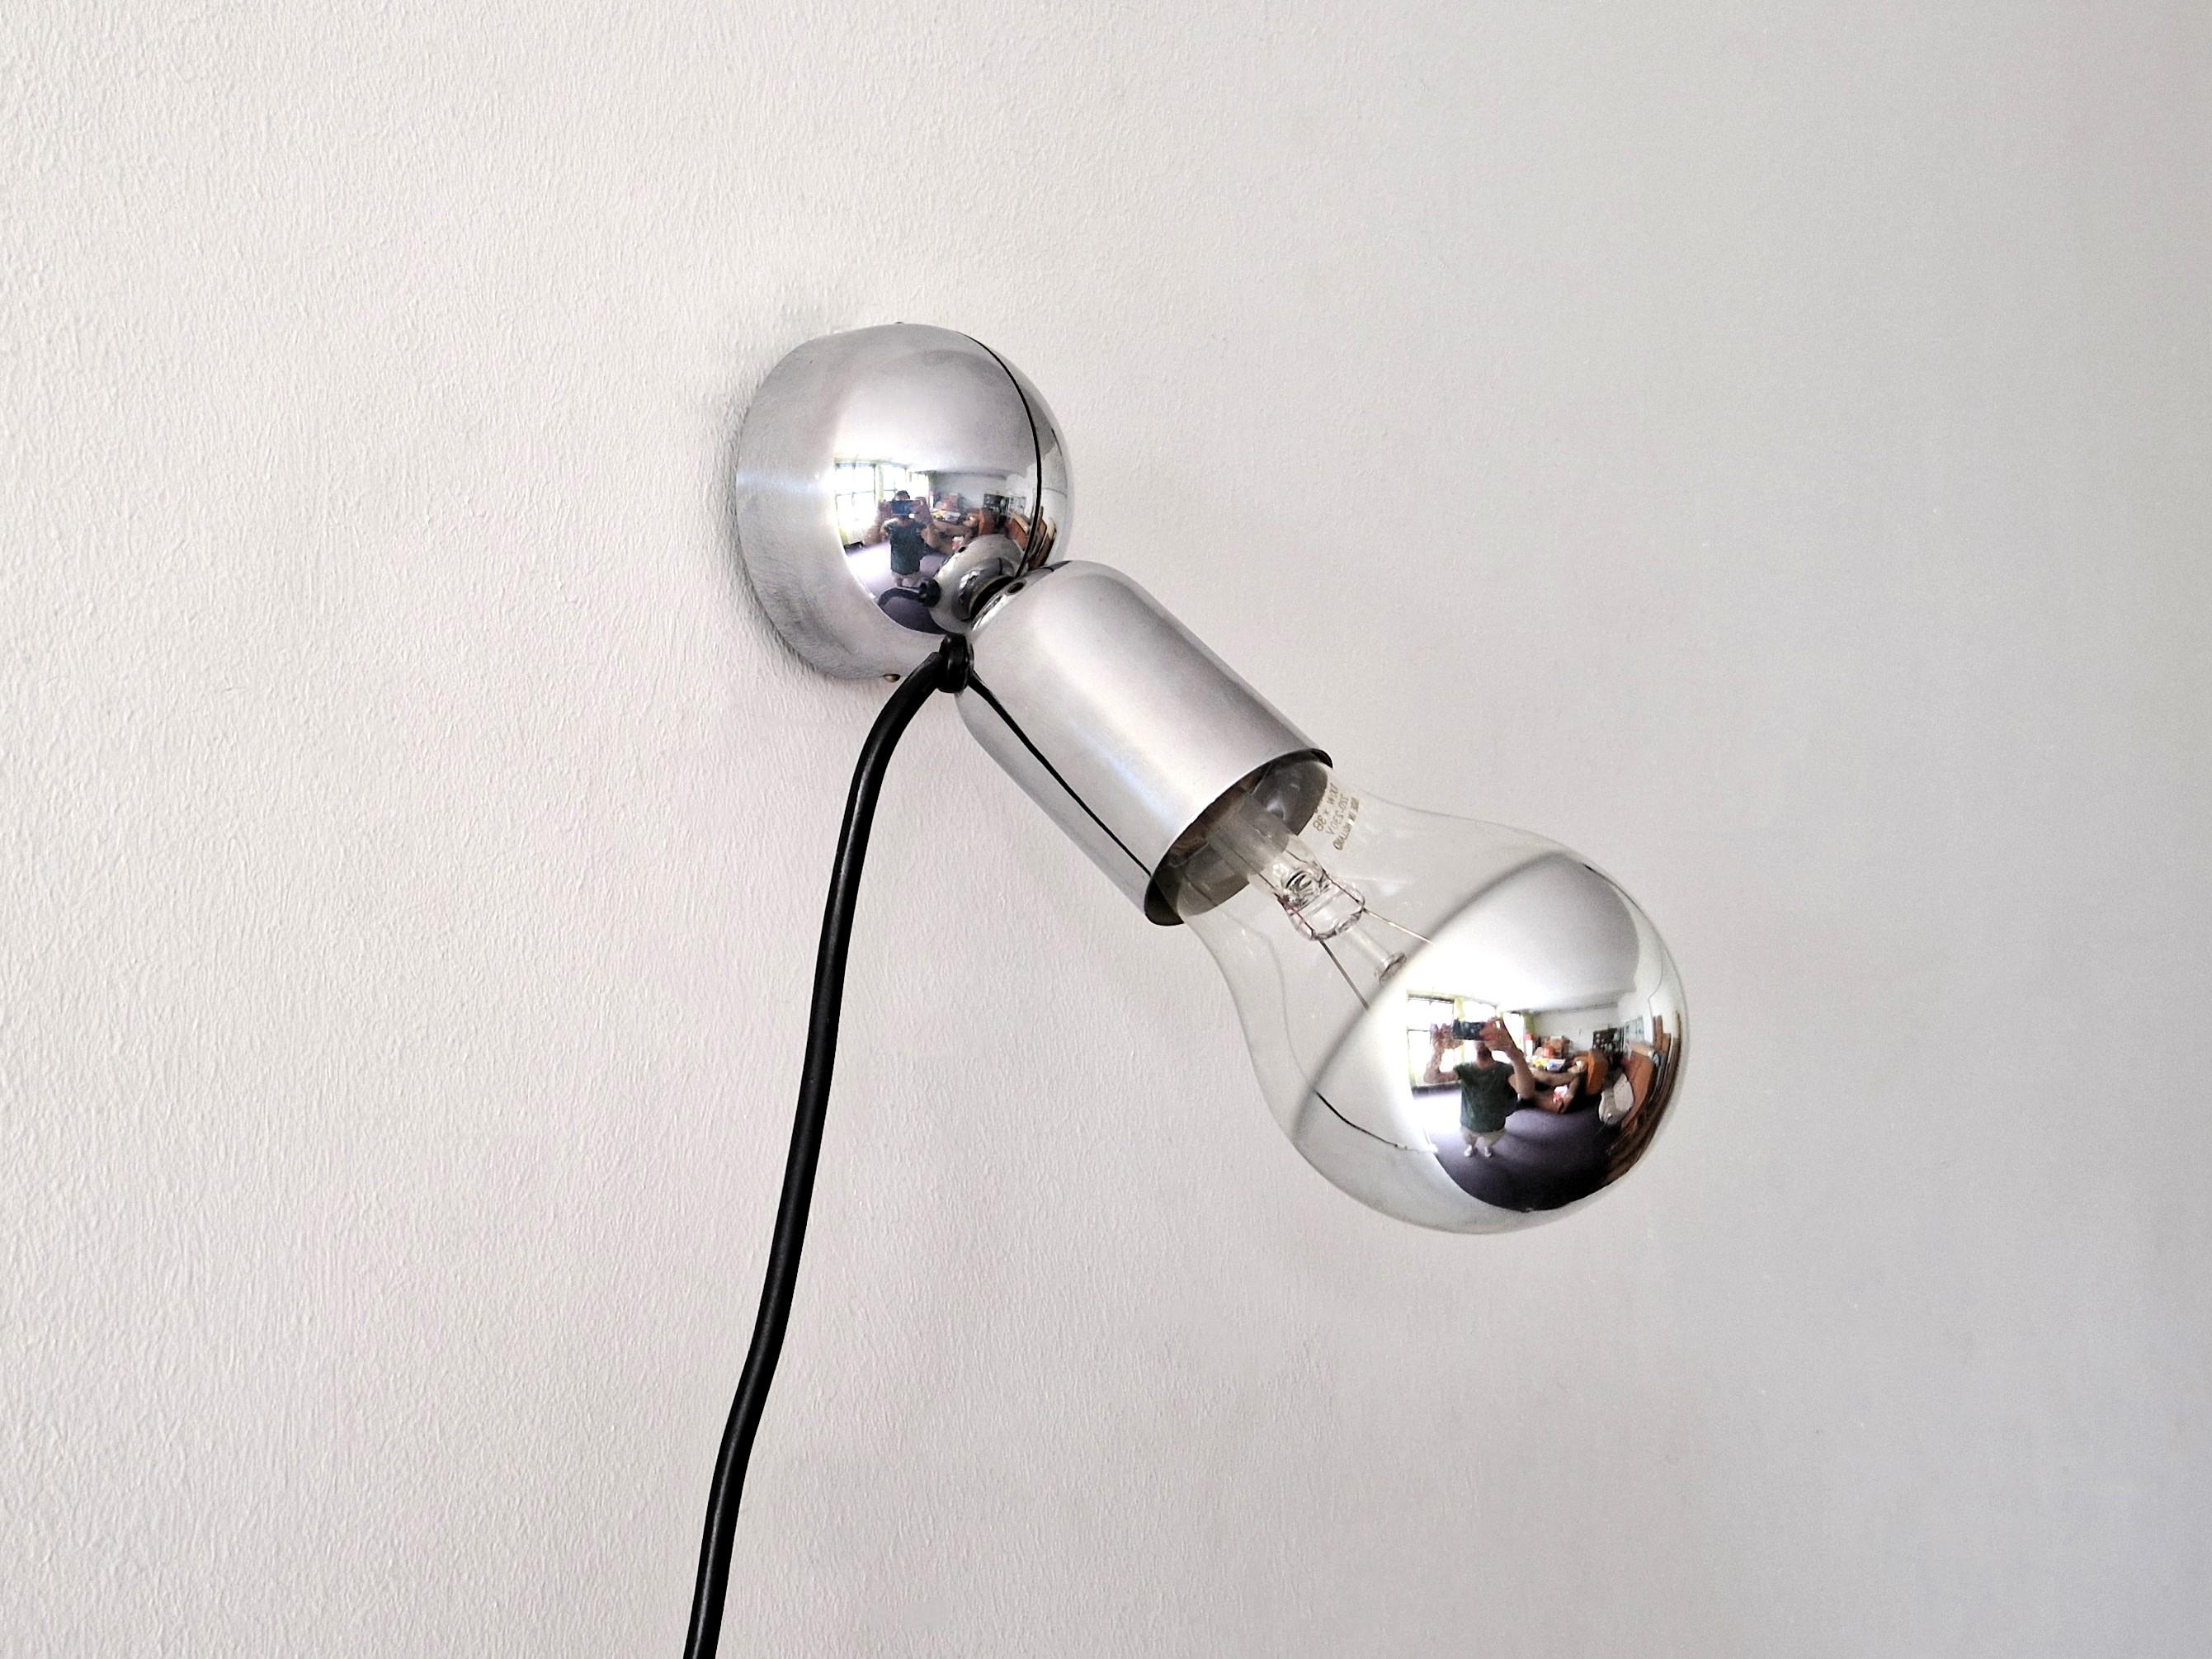 Mid-Century Modern Pollux table or wall lamp by Ingo Maurer for Design M, Germany 1960's